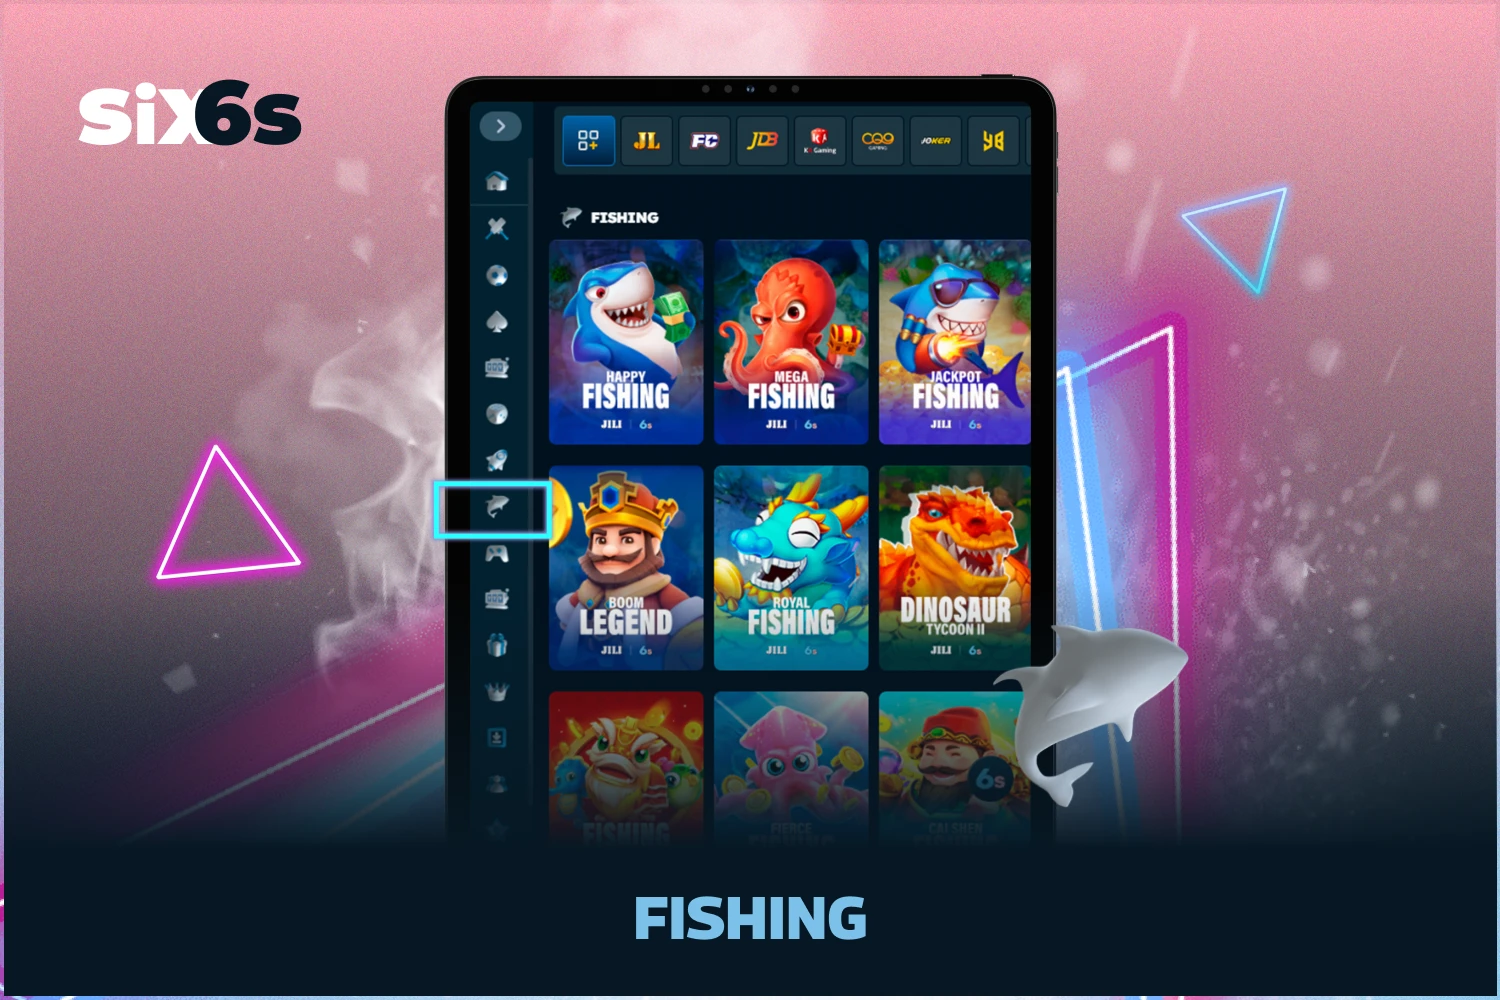 Fishing is a rather unusual genre of Six6s casino games, but is also popular among Bagladeshi players